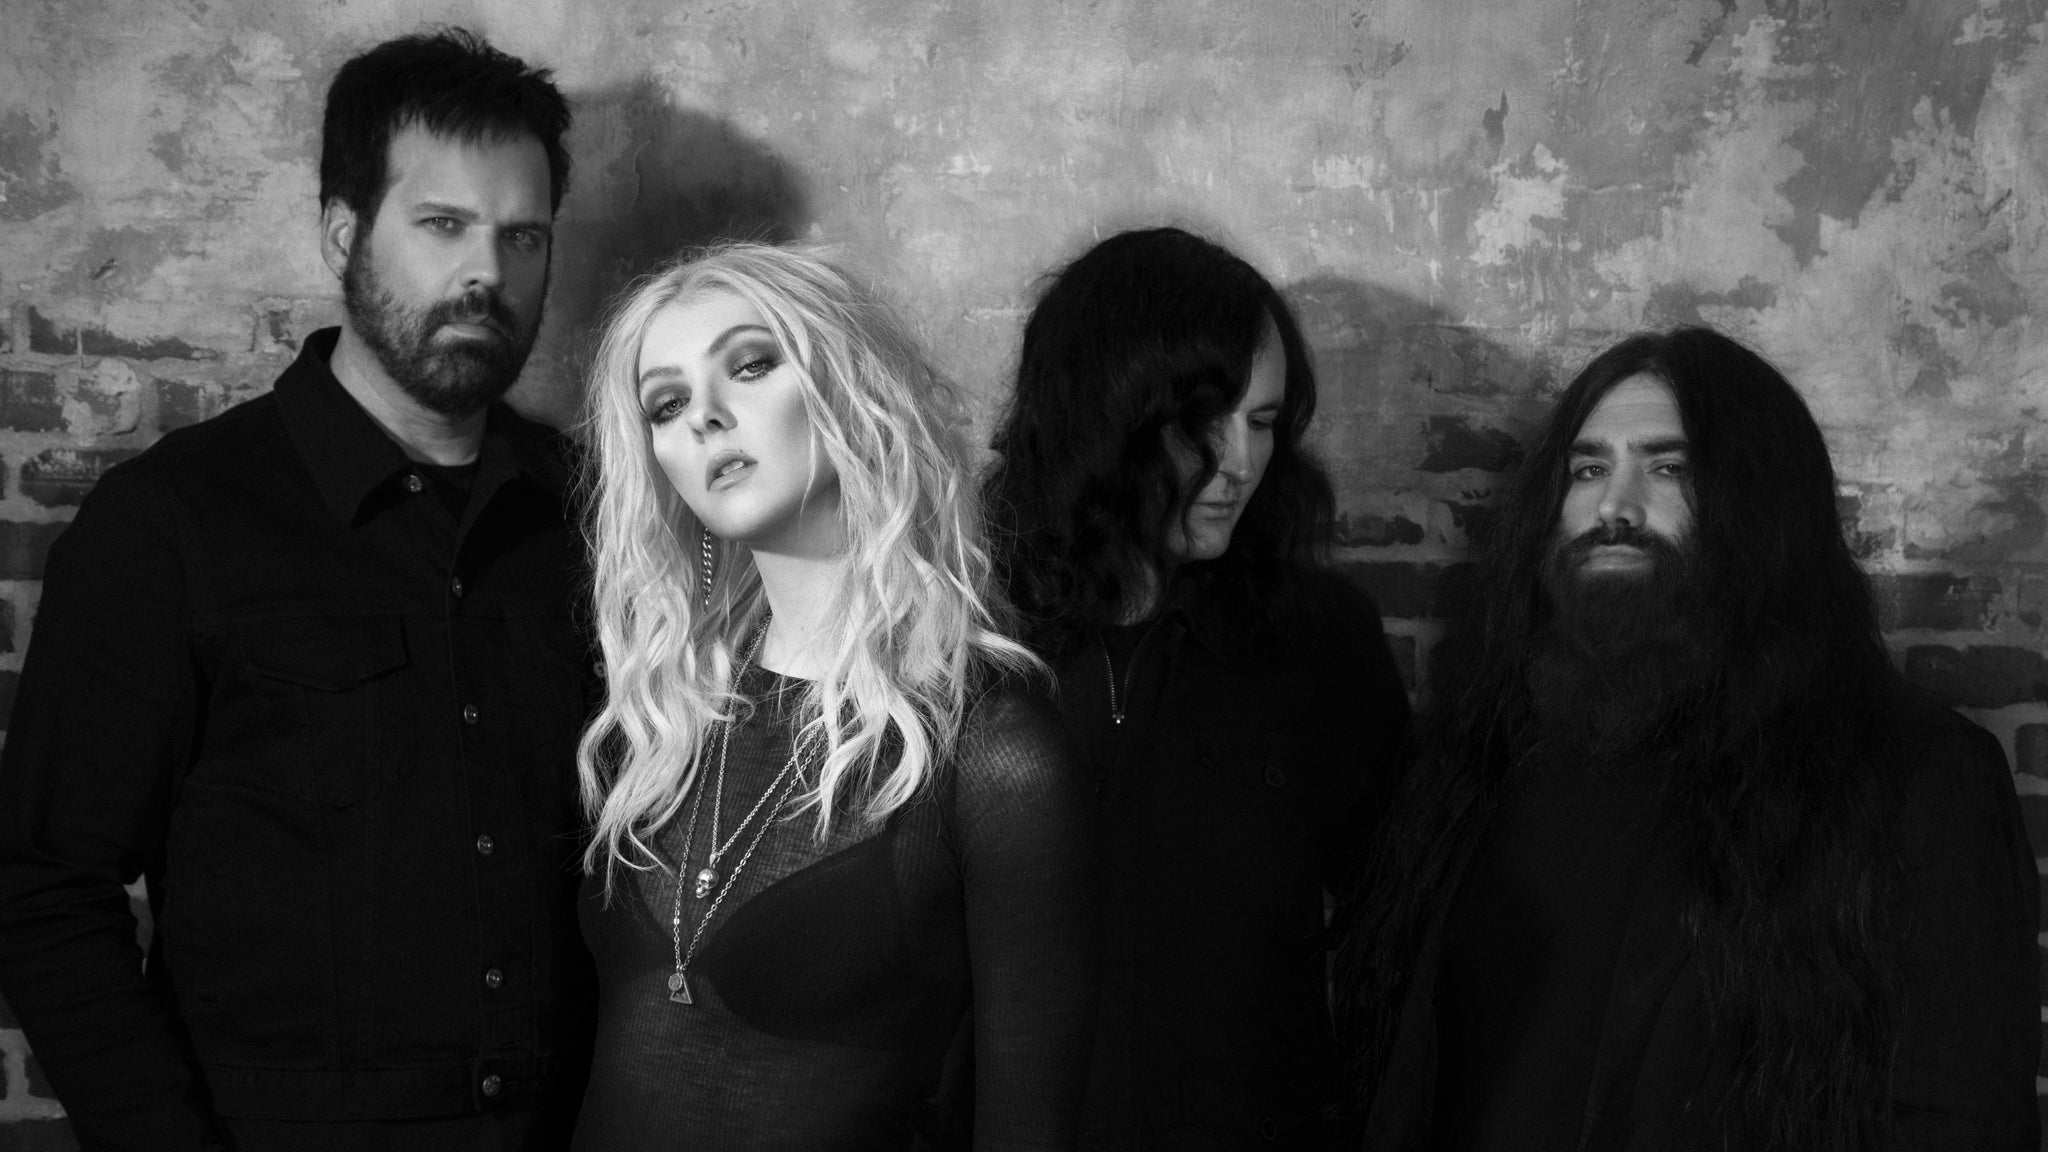 The Pretty Reckless pre-sale passcode for advance tickets in New York